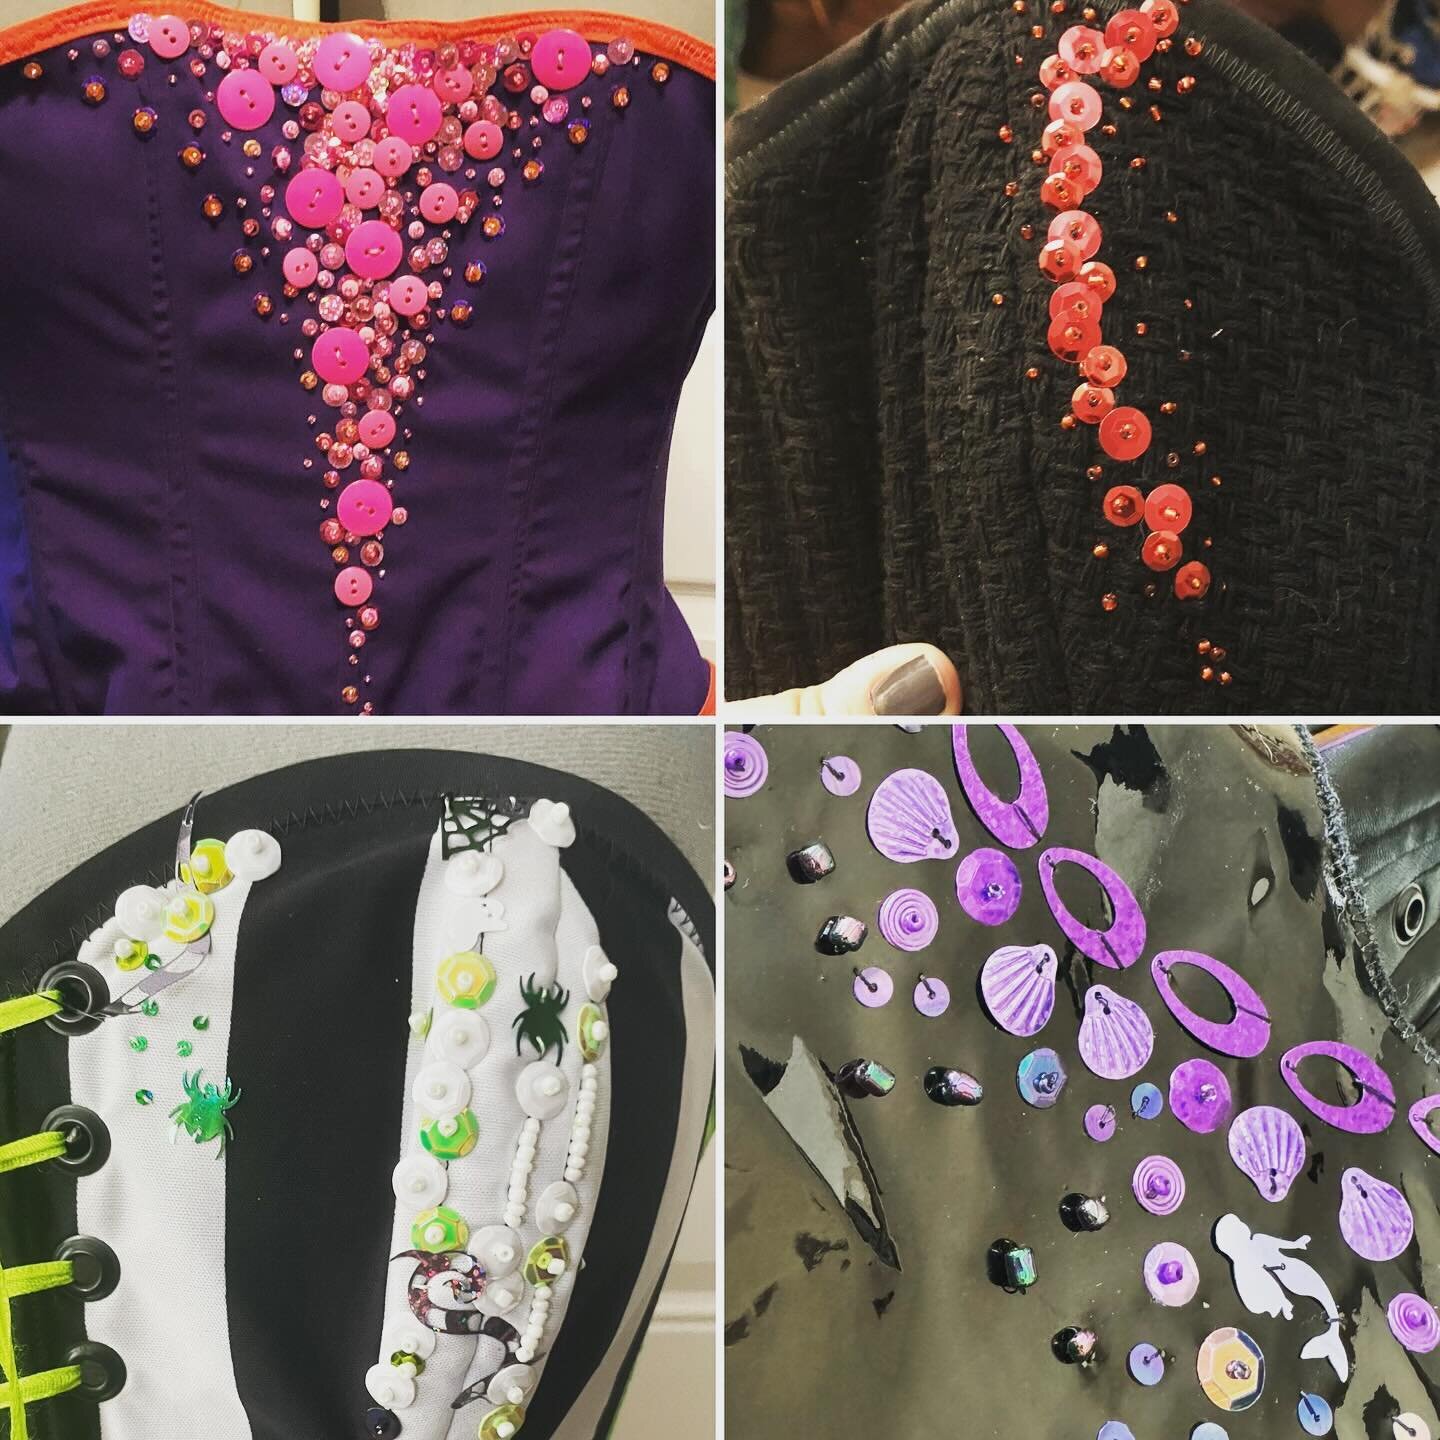 The devil is in the details. Still have spots open for early 2024 commissions. DM me and let&rsquo;s create something amazing! #corsets #cosplay #commissionswelcome #handmade #sewing #nerdcore